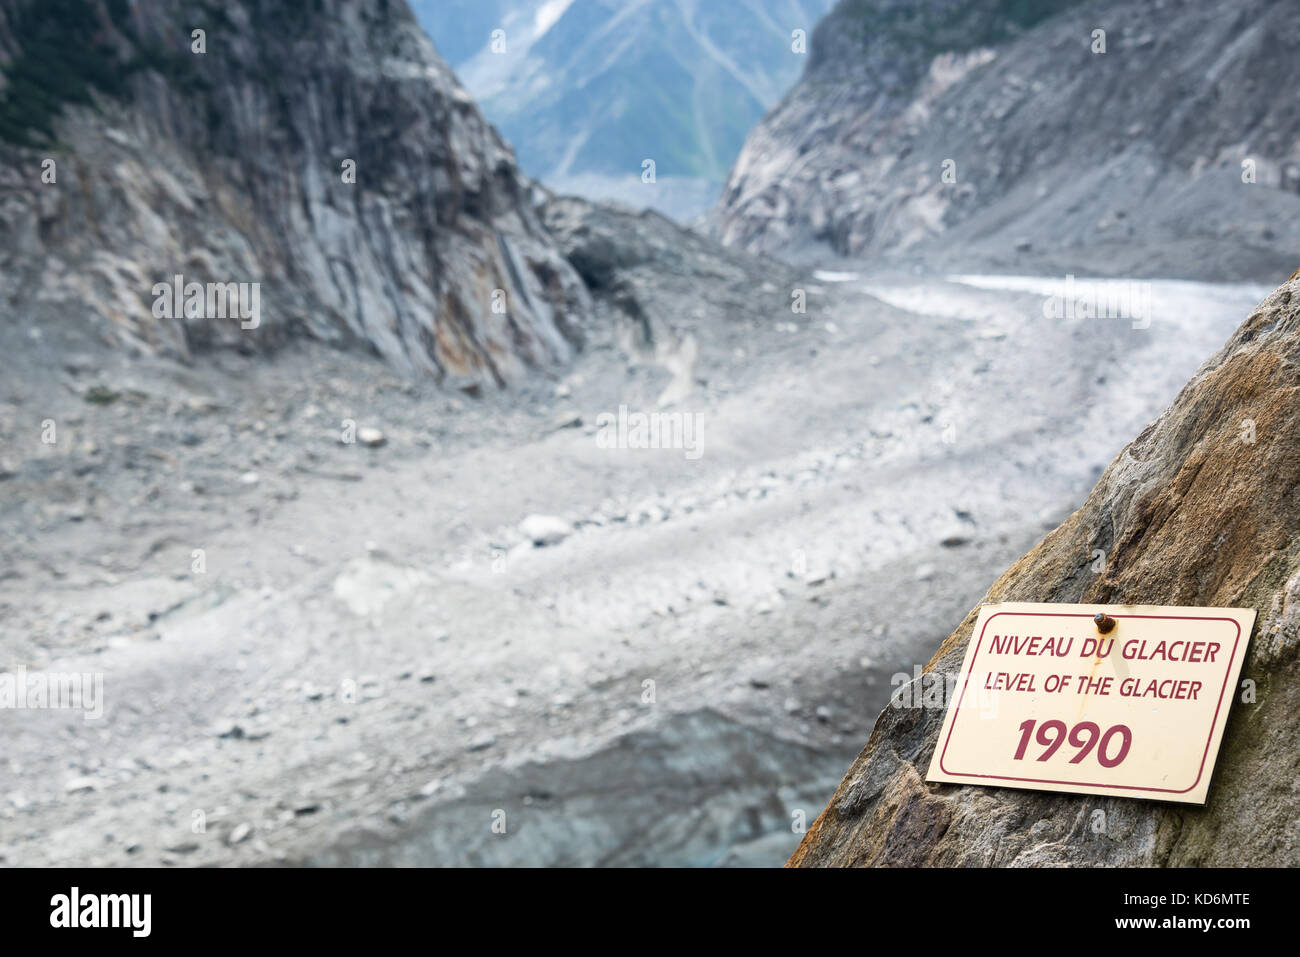 Sign indicating the level of the Glacier Mer de Glace in 1990, glacier melting illustration, in Chamonix Mont Blanc Massif, The Alps, France Stock Photo